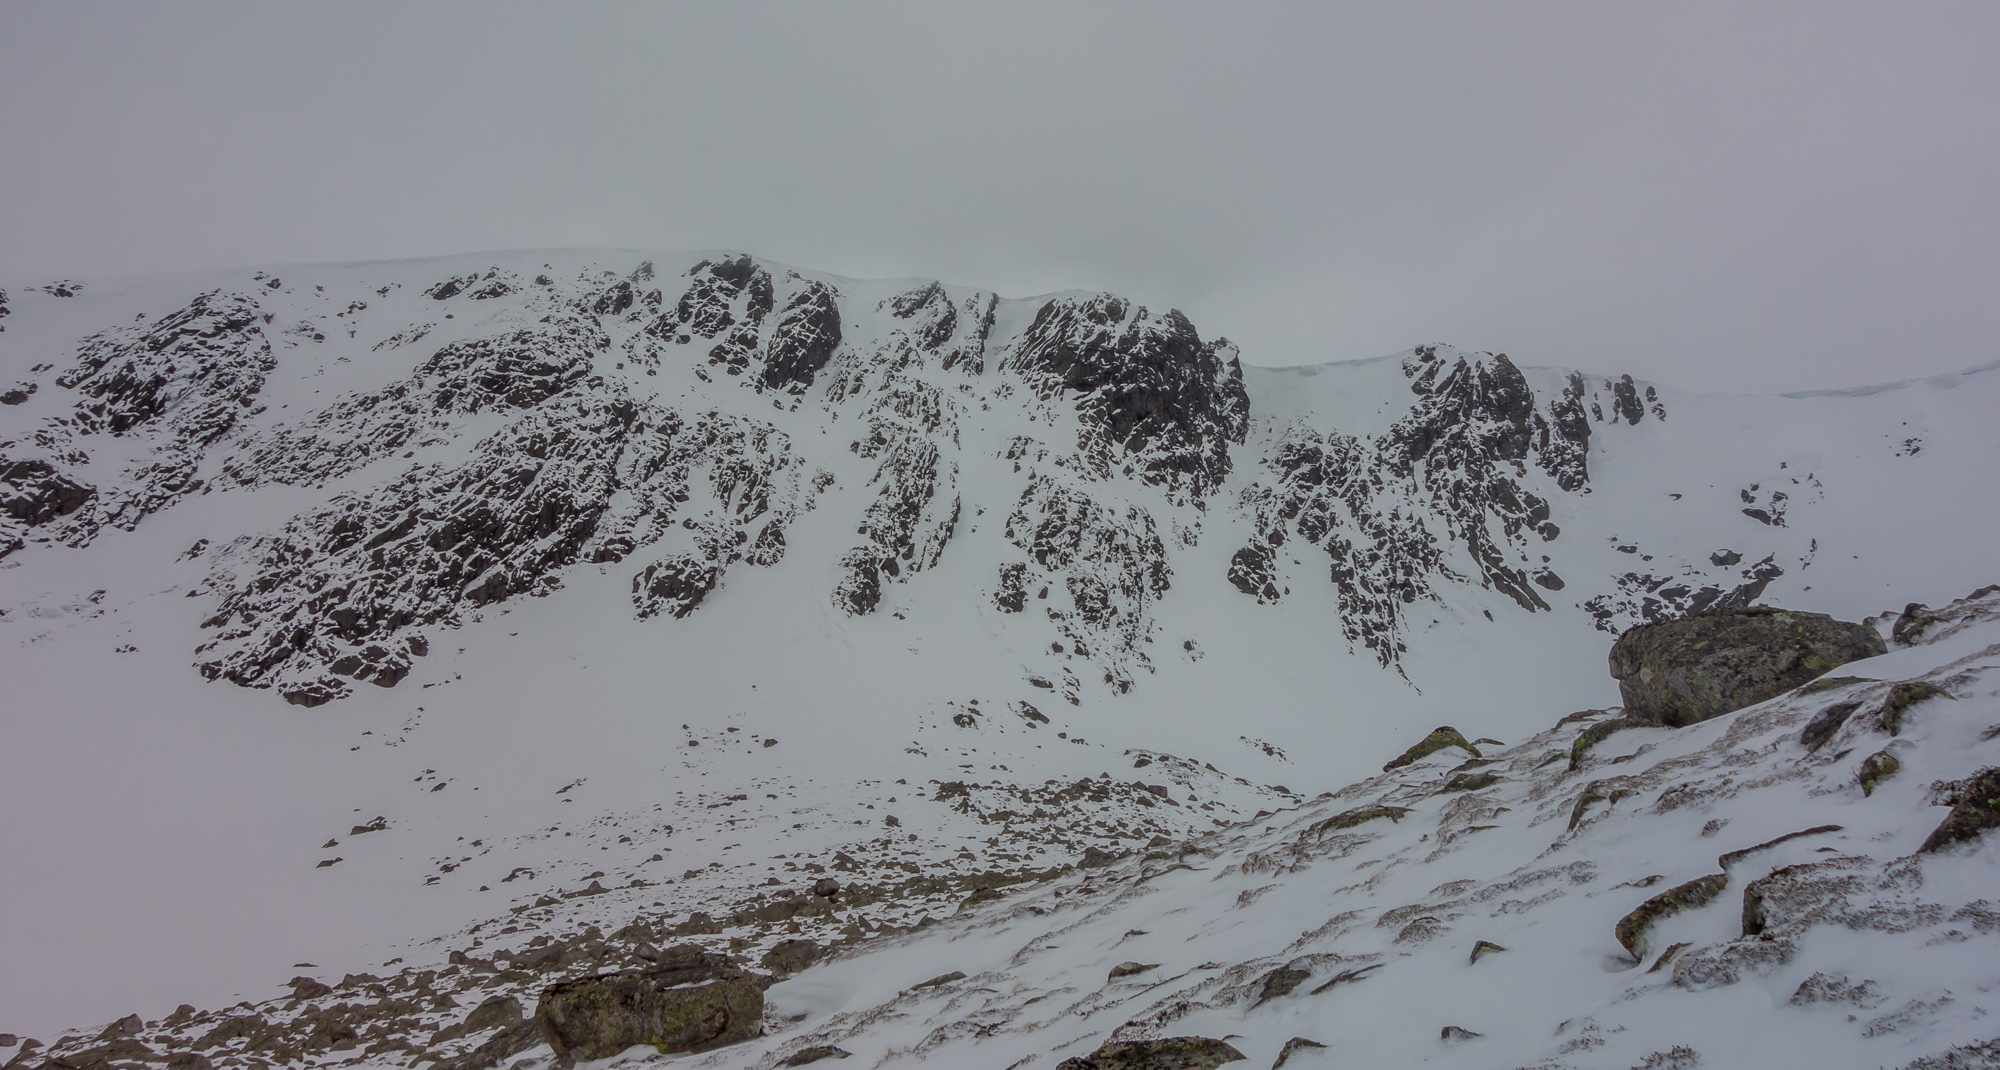 The view into Coire nan Lochain from the base of the route